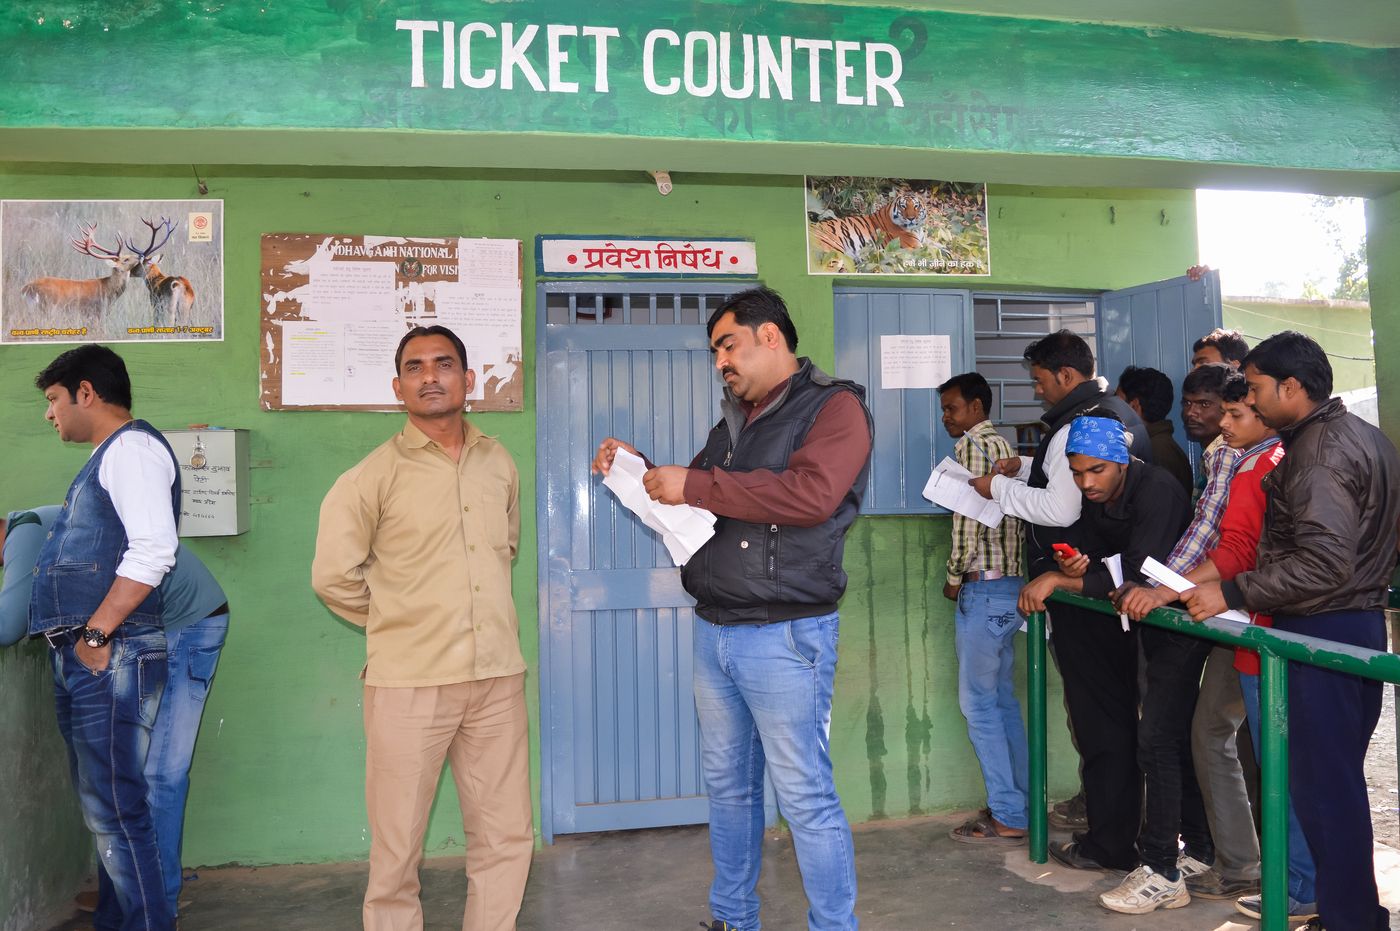 A naturalist checks his guests’ permits while other visitors stand in line at the ticket counter outside Bandhavgarh Reserve.